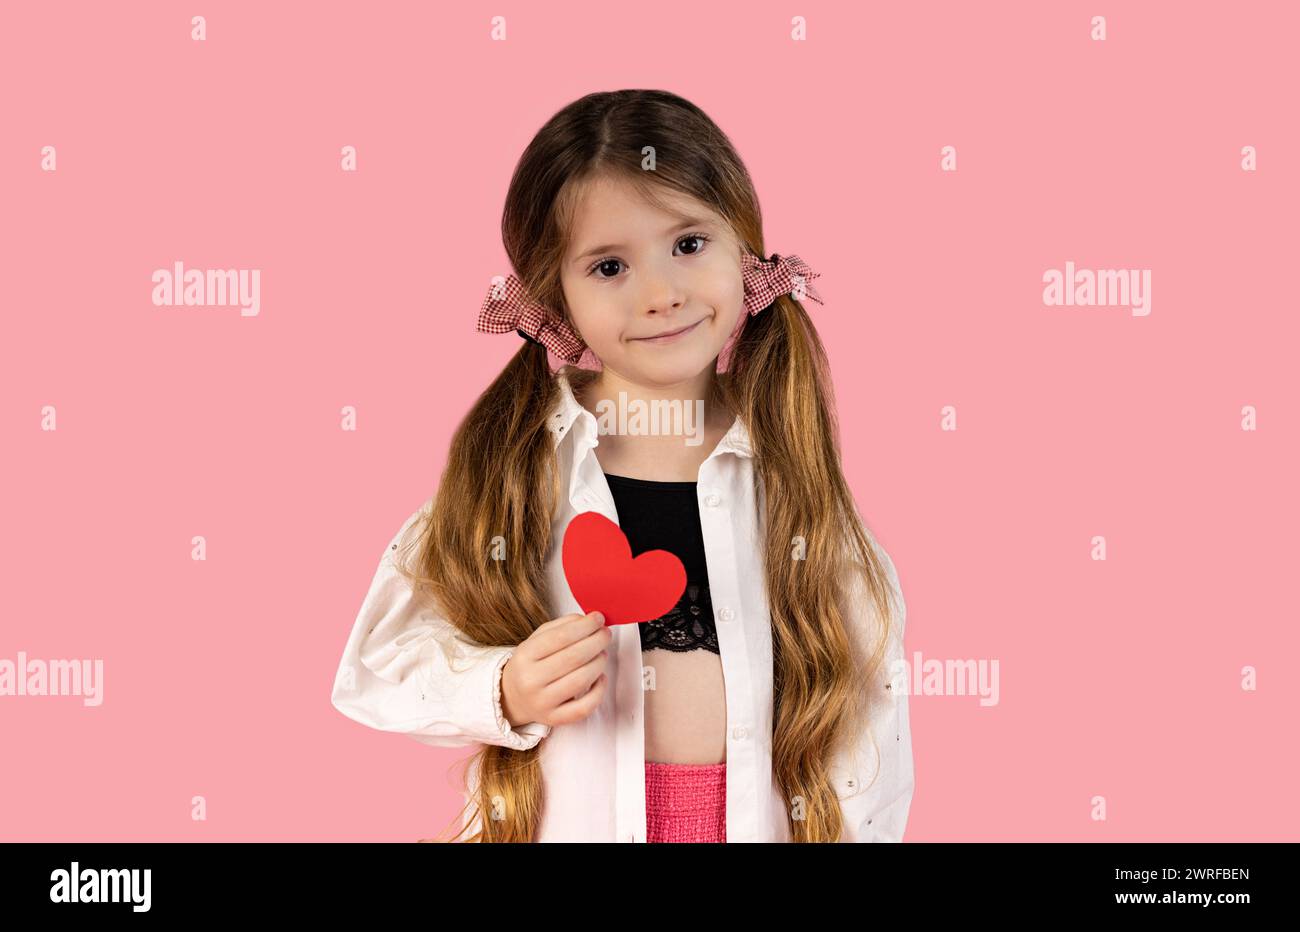 A little girl with two pigtails caught with two pink tops, who is pictured on a pink background holding a heart, is dedicated to her mother or to all Stock Photo